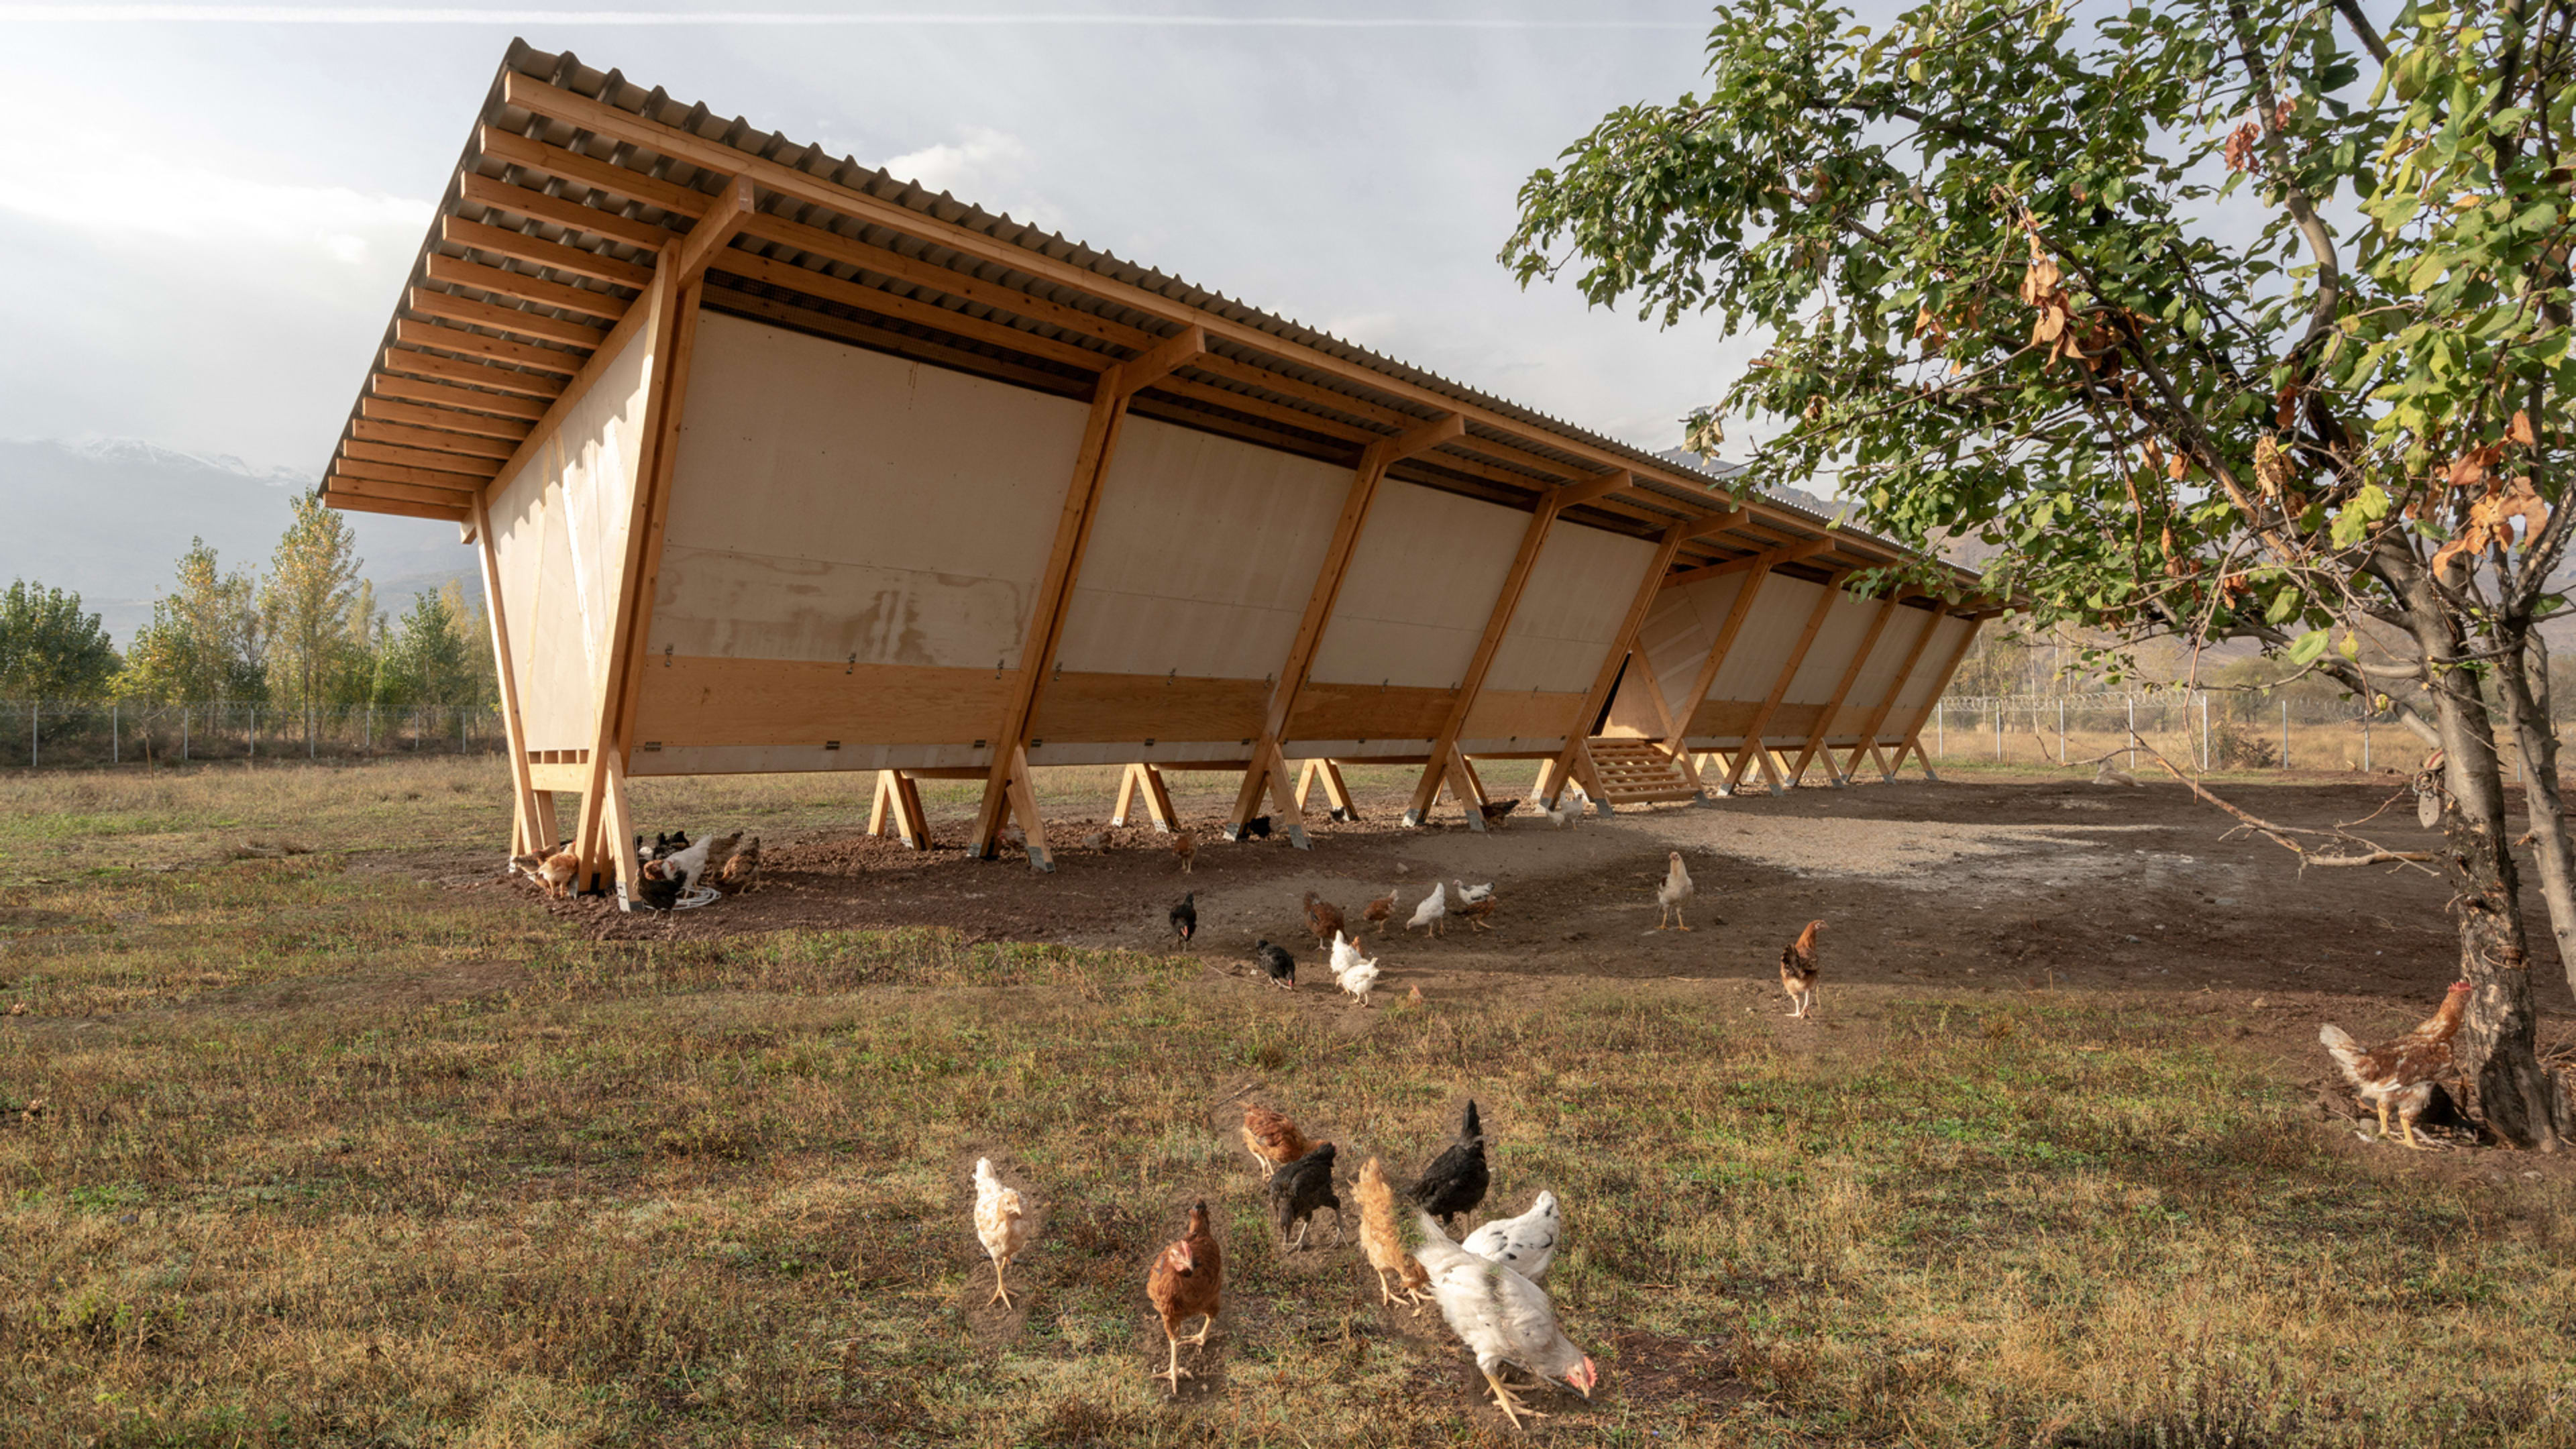 This $20,000 chicken coop is more beautiful than your house